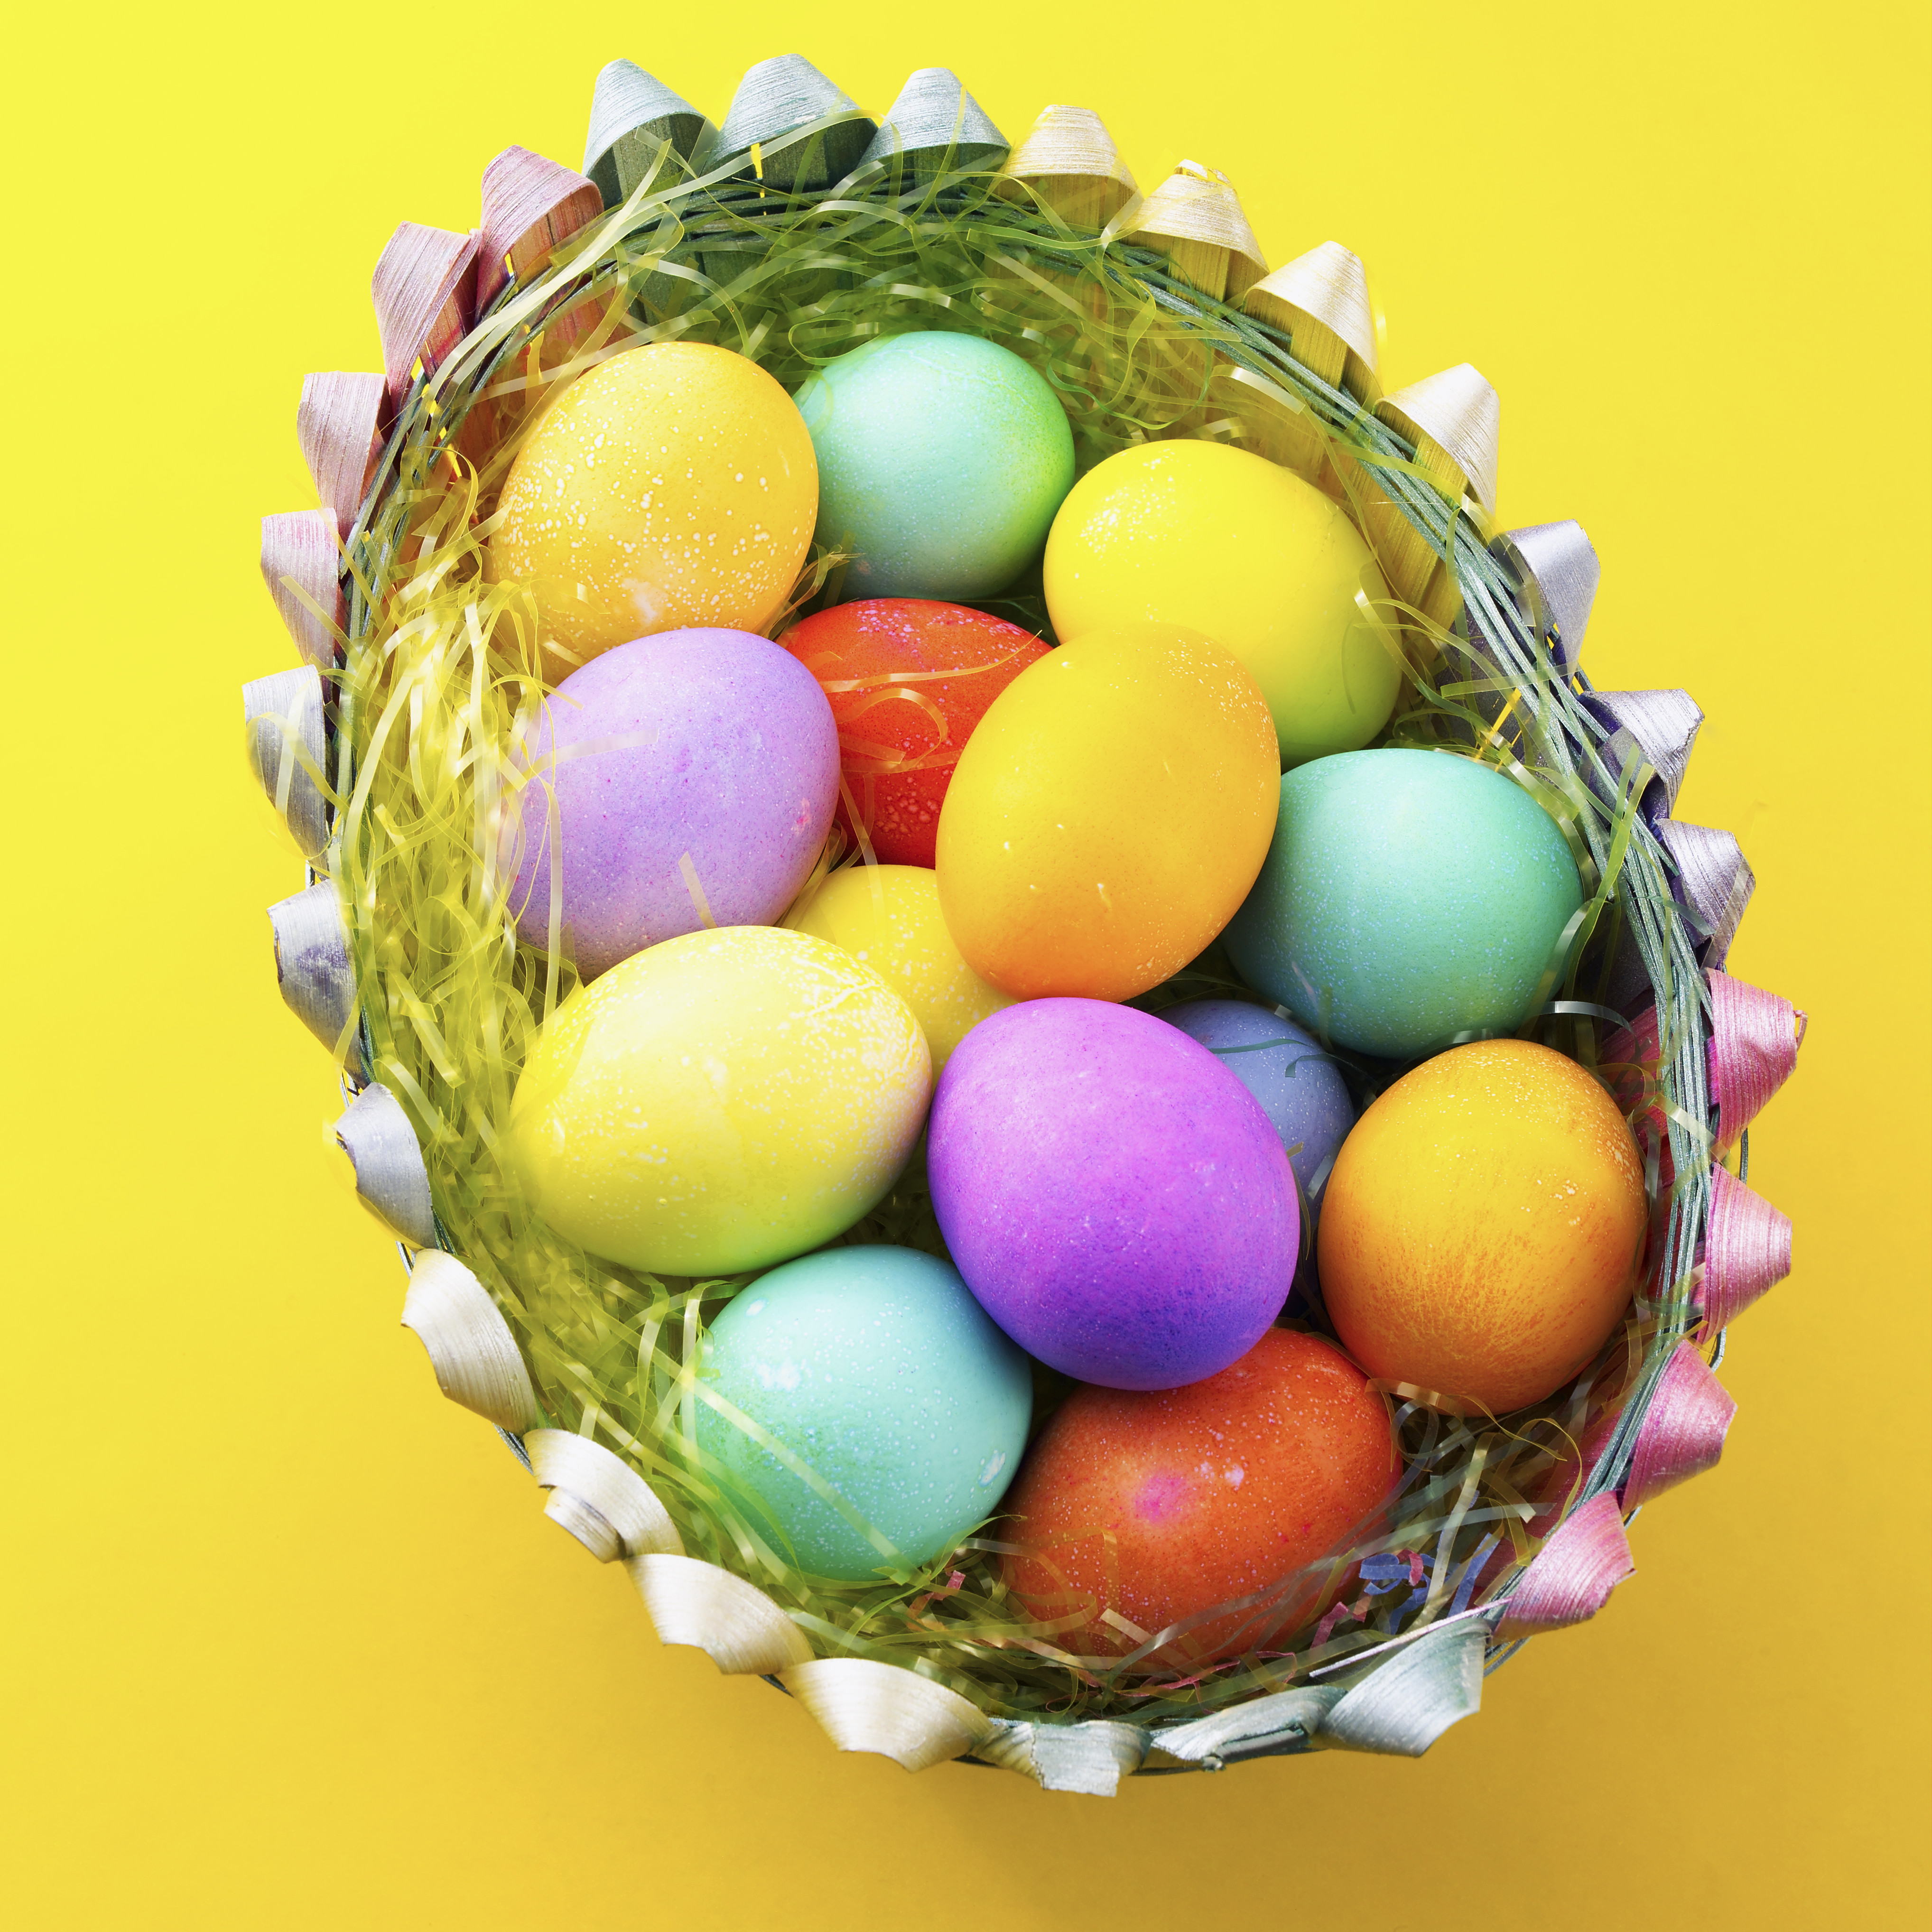 Easter Traditions Pictures - Easter 2018 - HISTORY.com